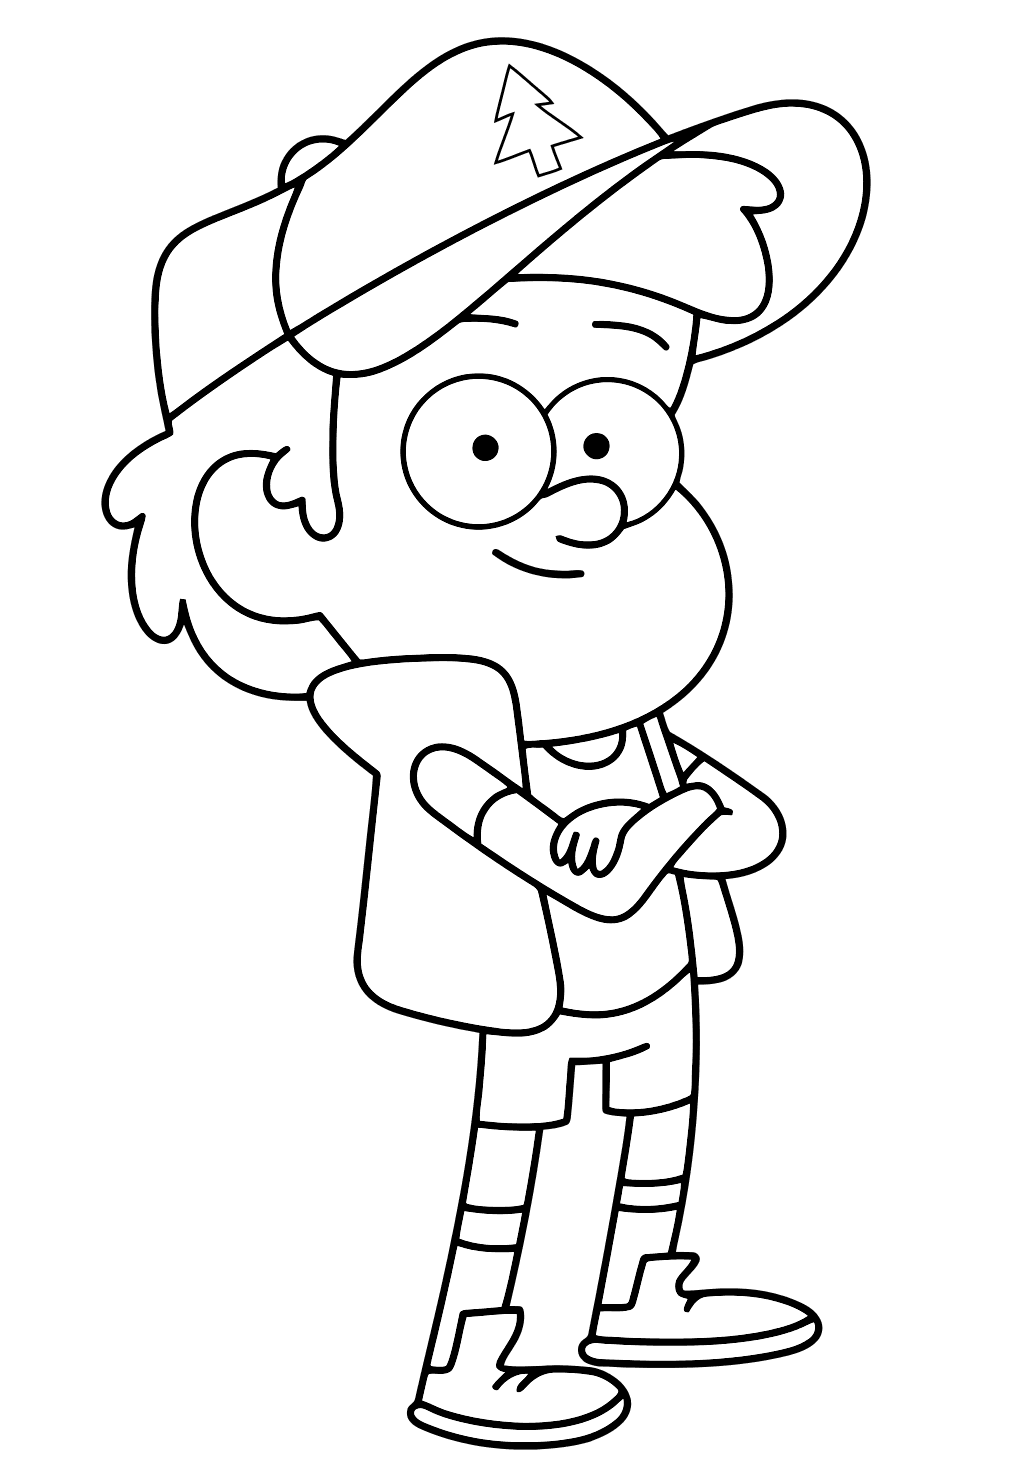 Mabel Pines Coloring Pages At Getdrawingscom Free For Personal